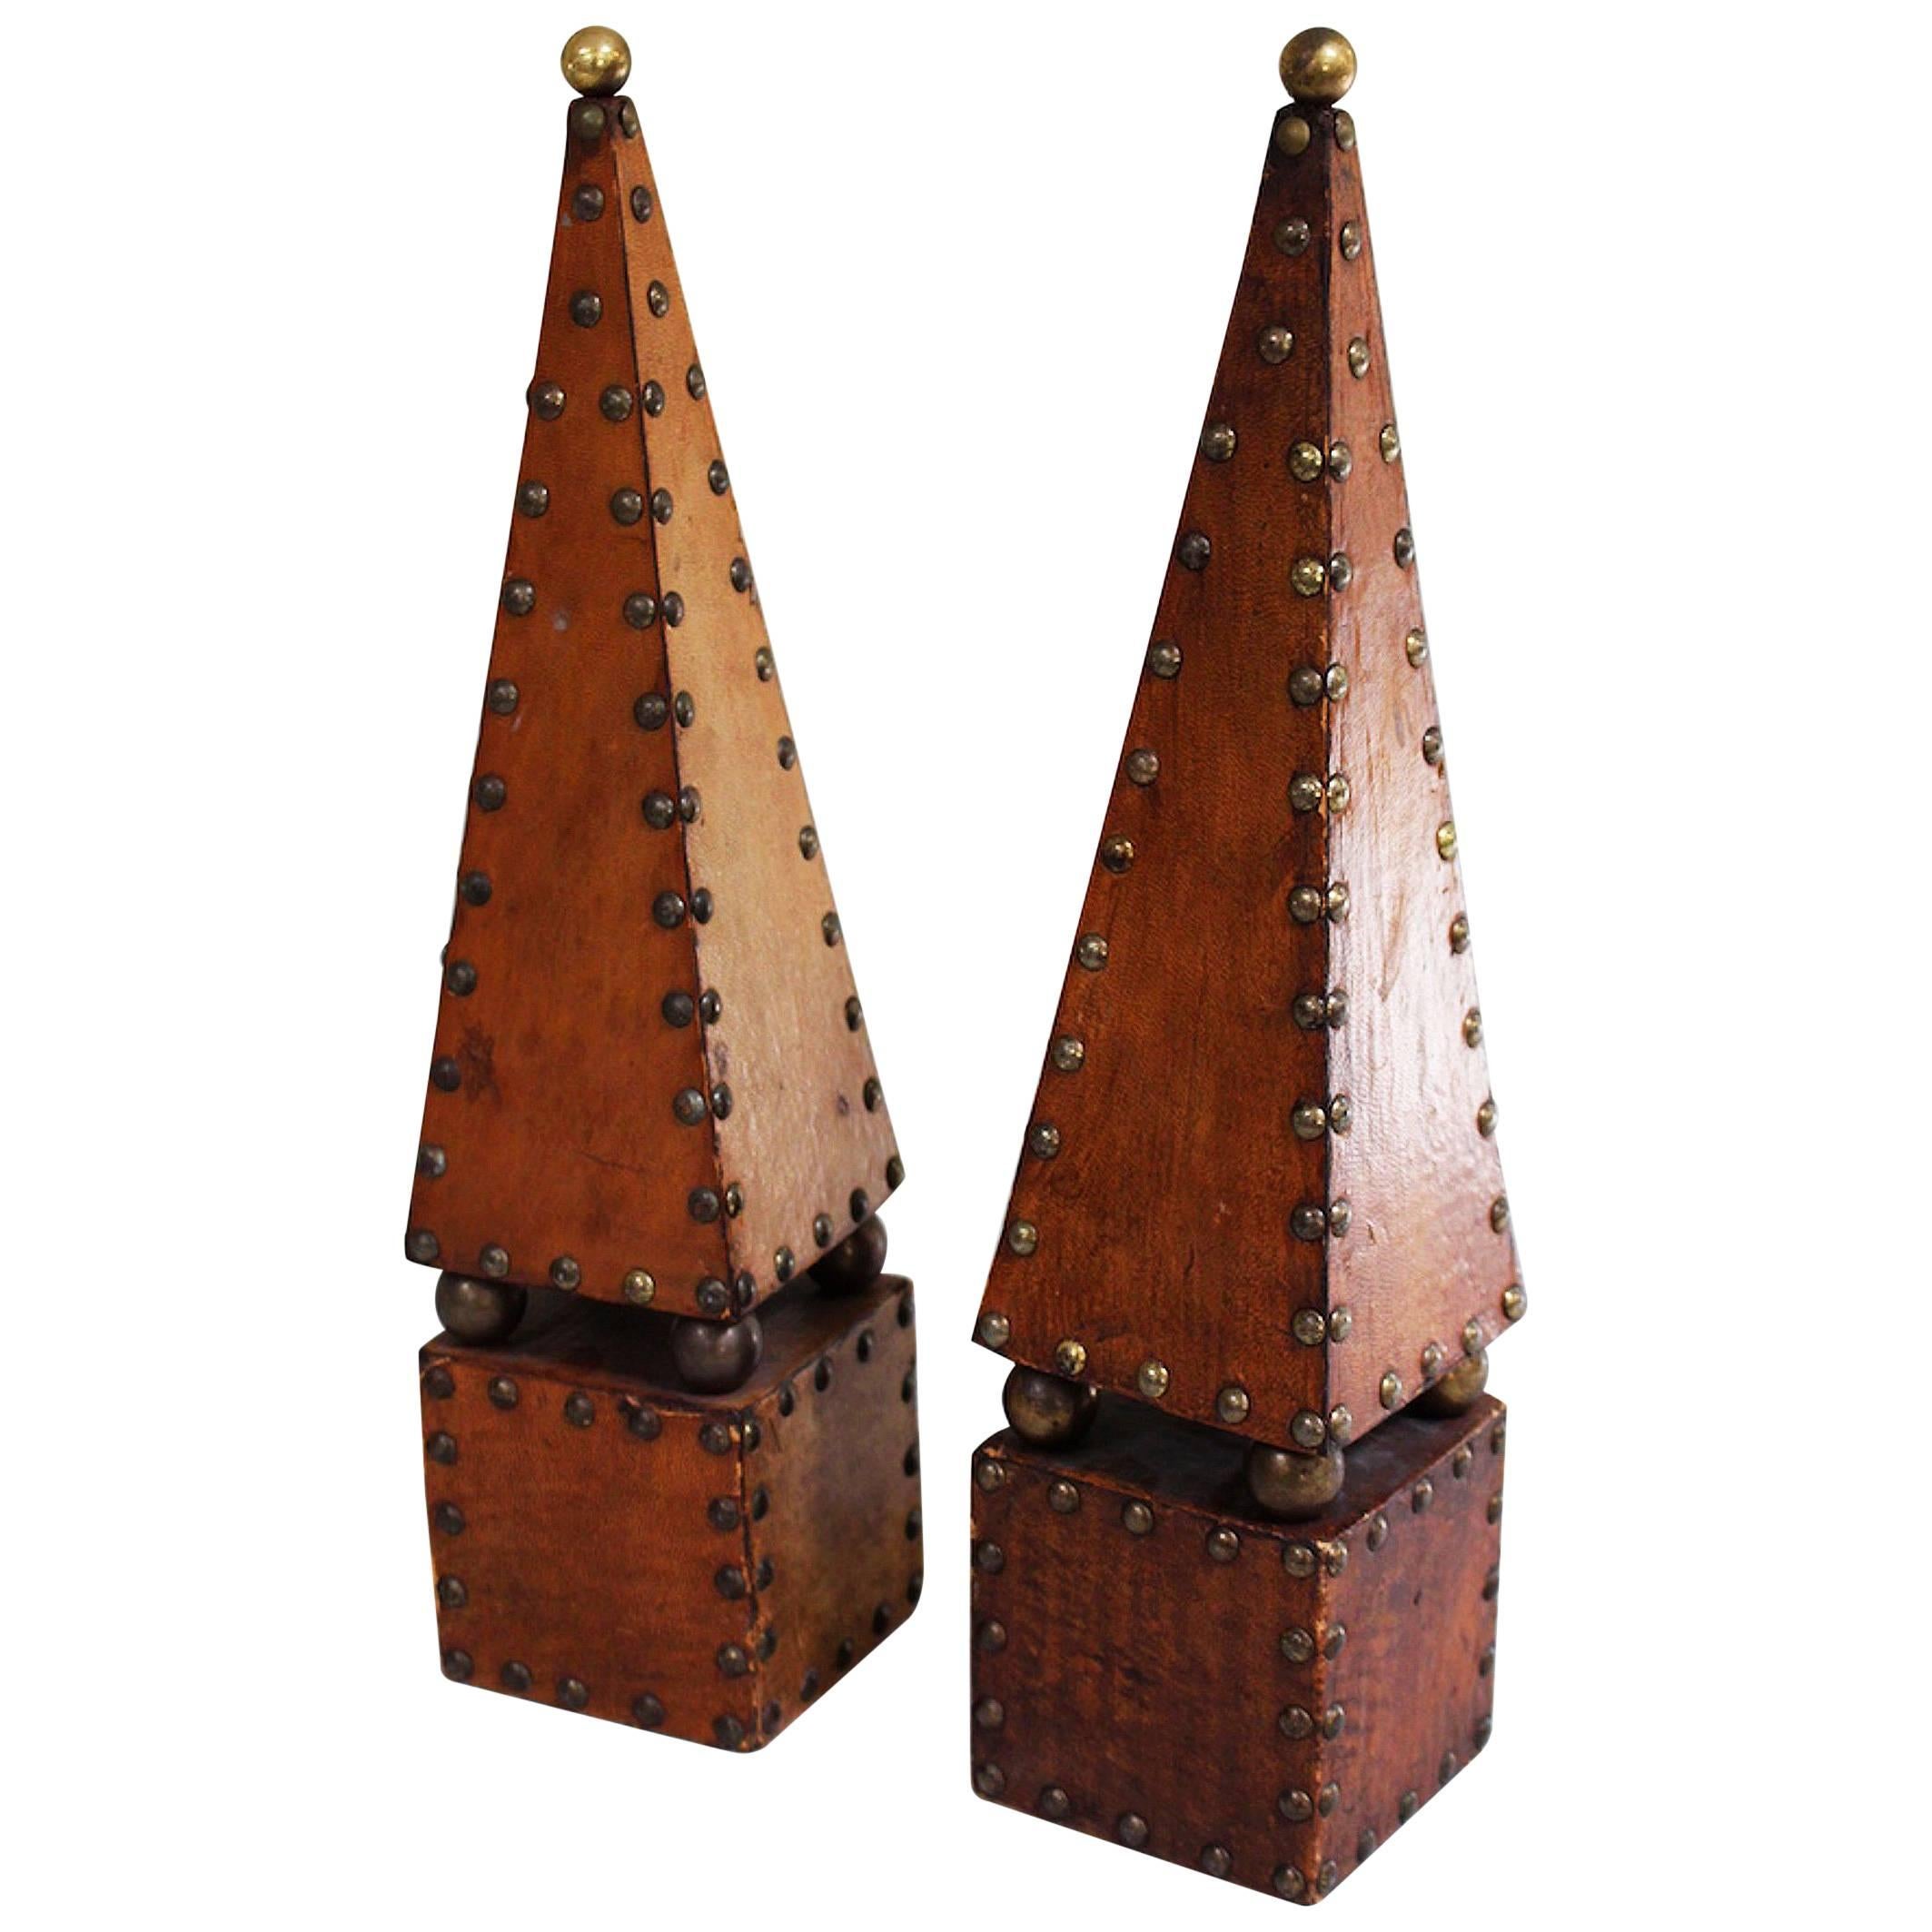 English Decorative Leather and Brass Obelisks (Priced as a Pair)